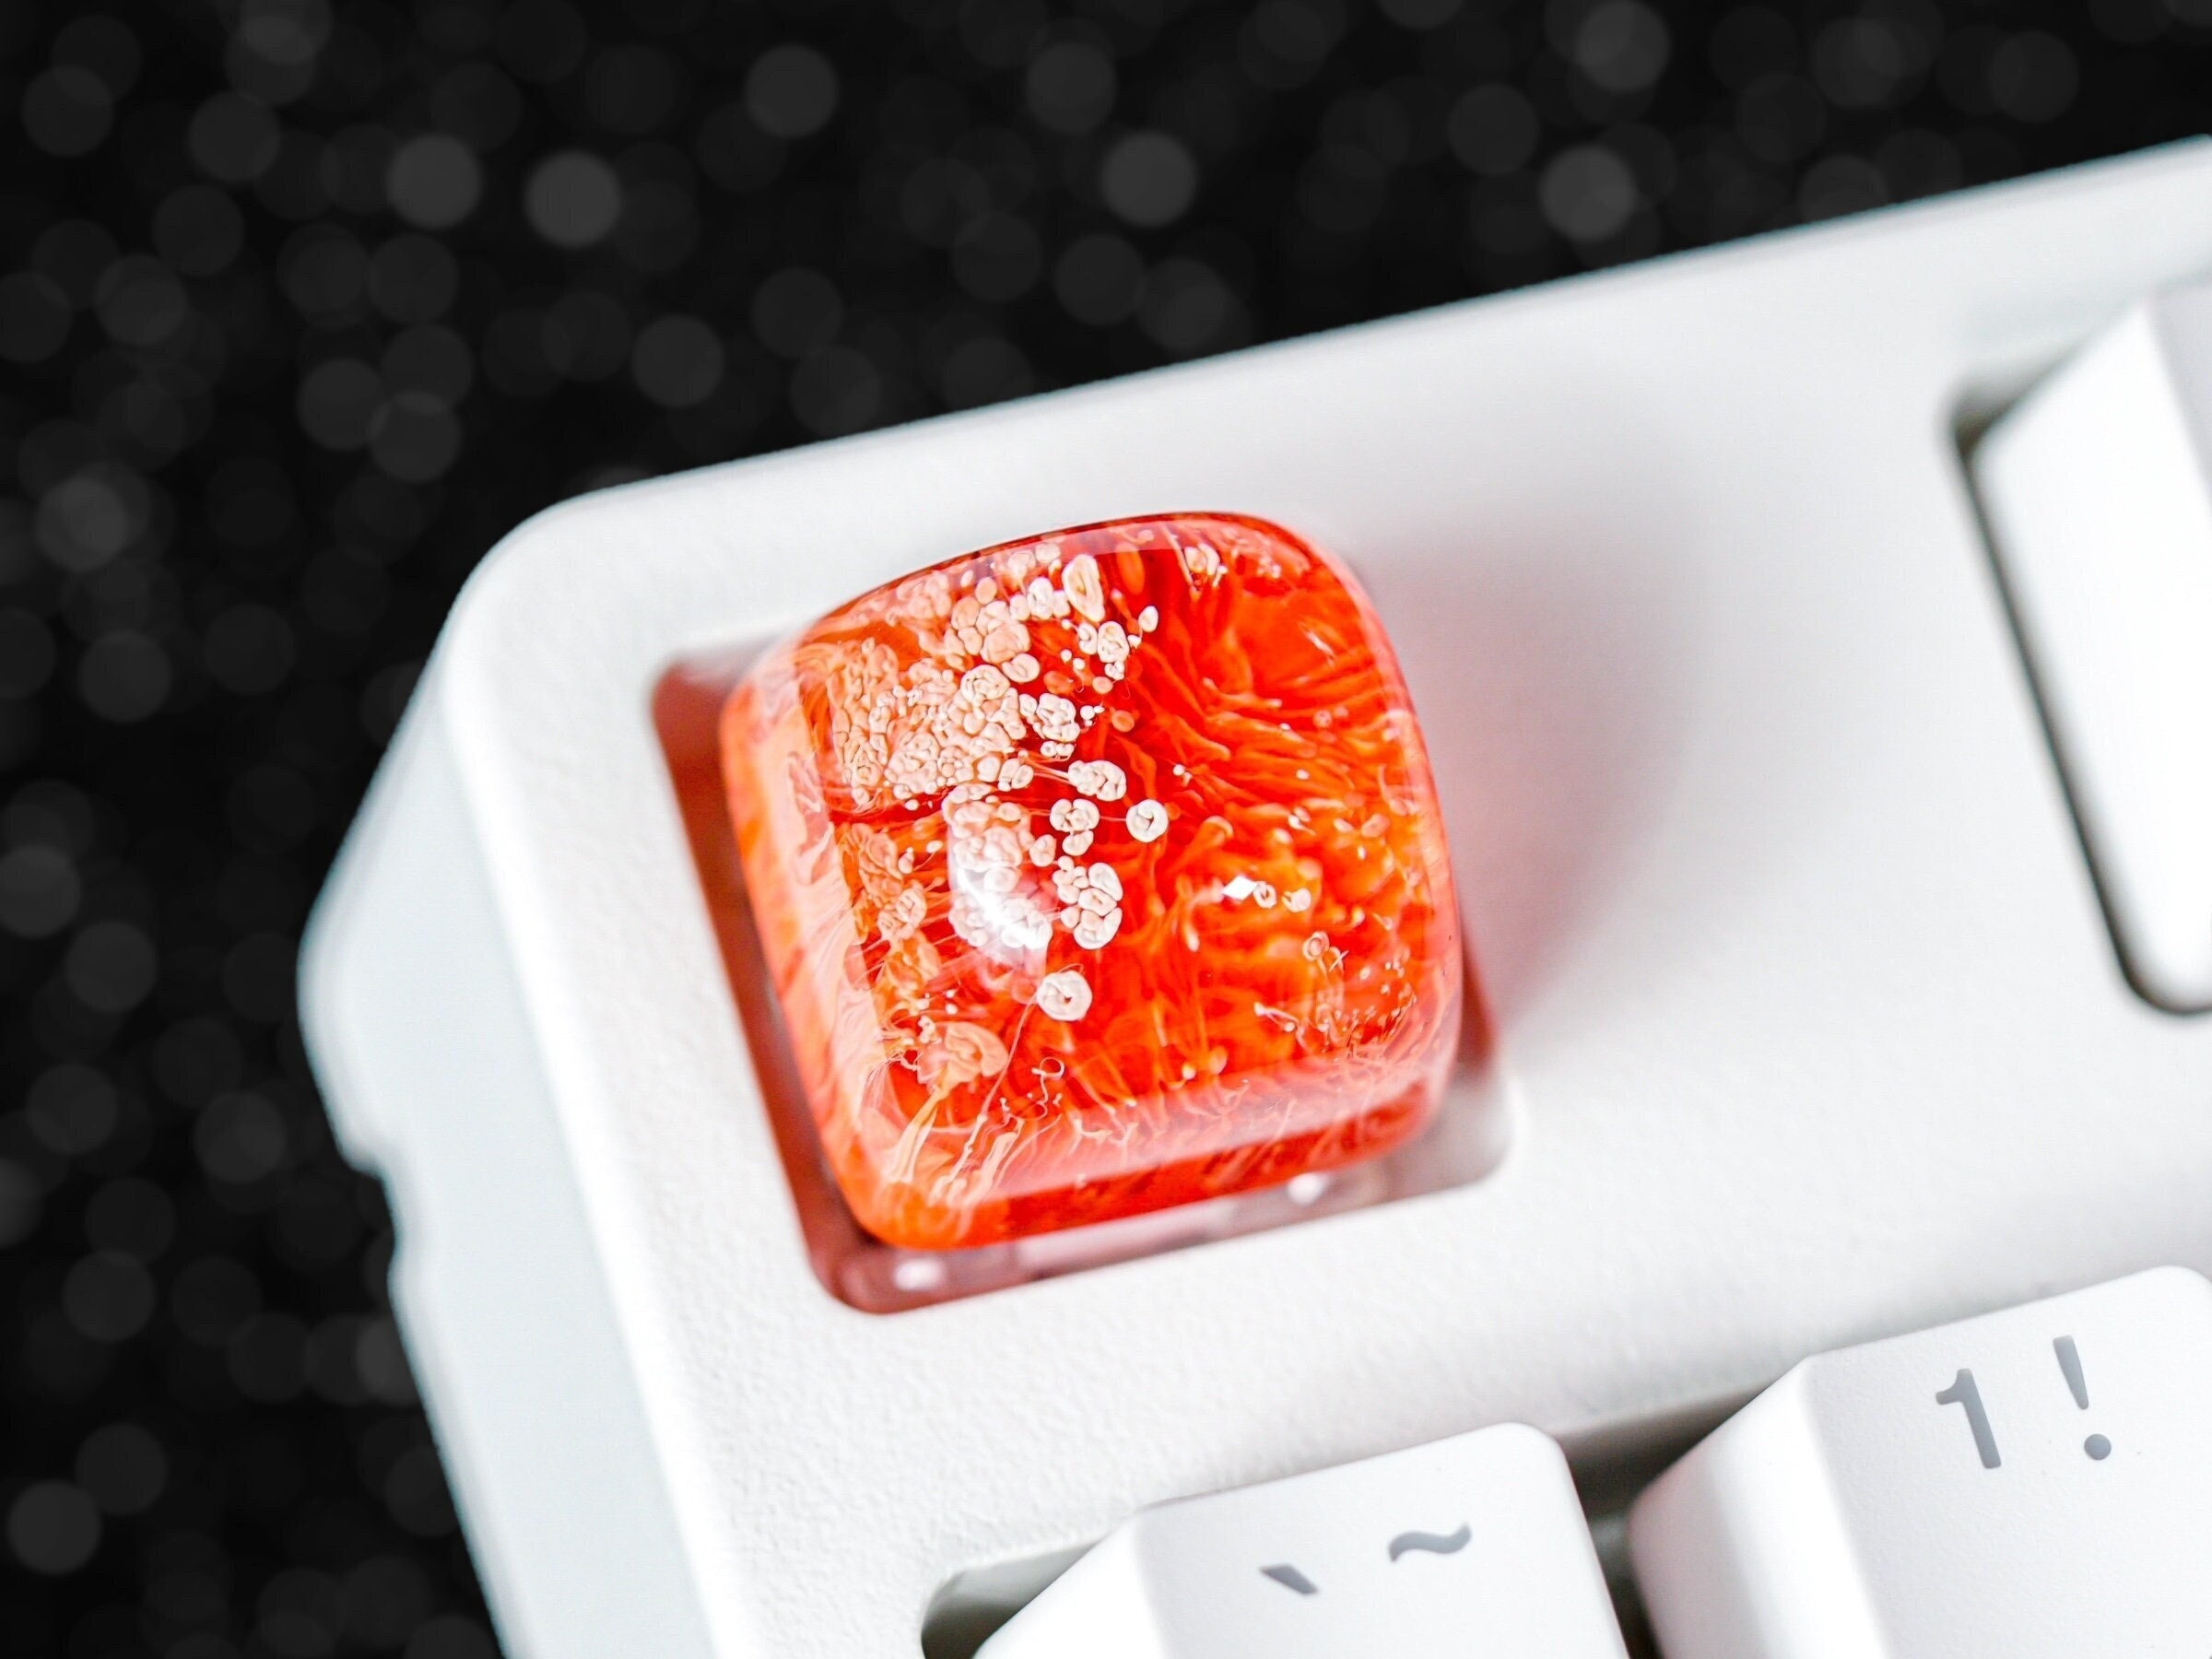 Red Coral Keycap, Ocean Keycap, Artisan Keycap, Keycap for MX Cherry Switches Keyboard, Handmade Gift